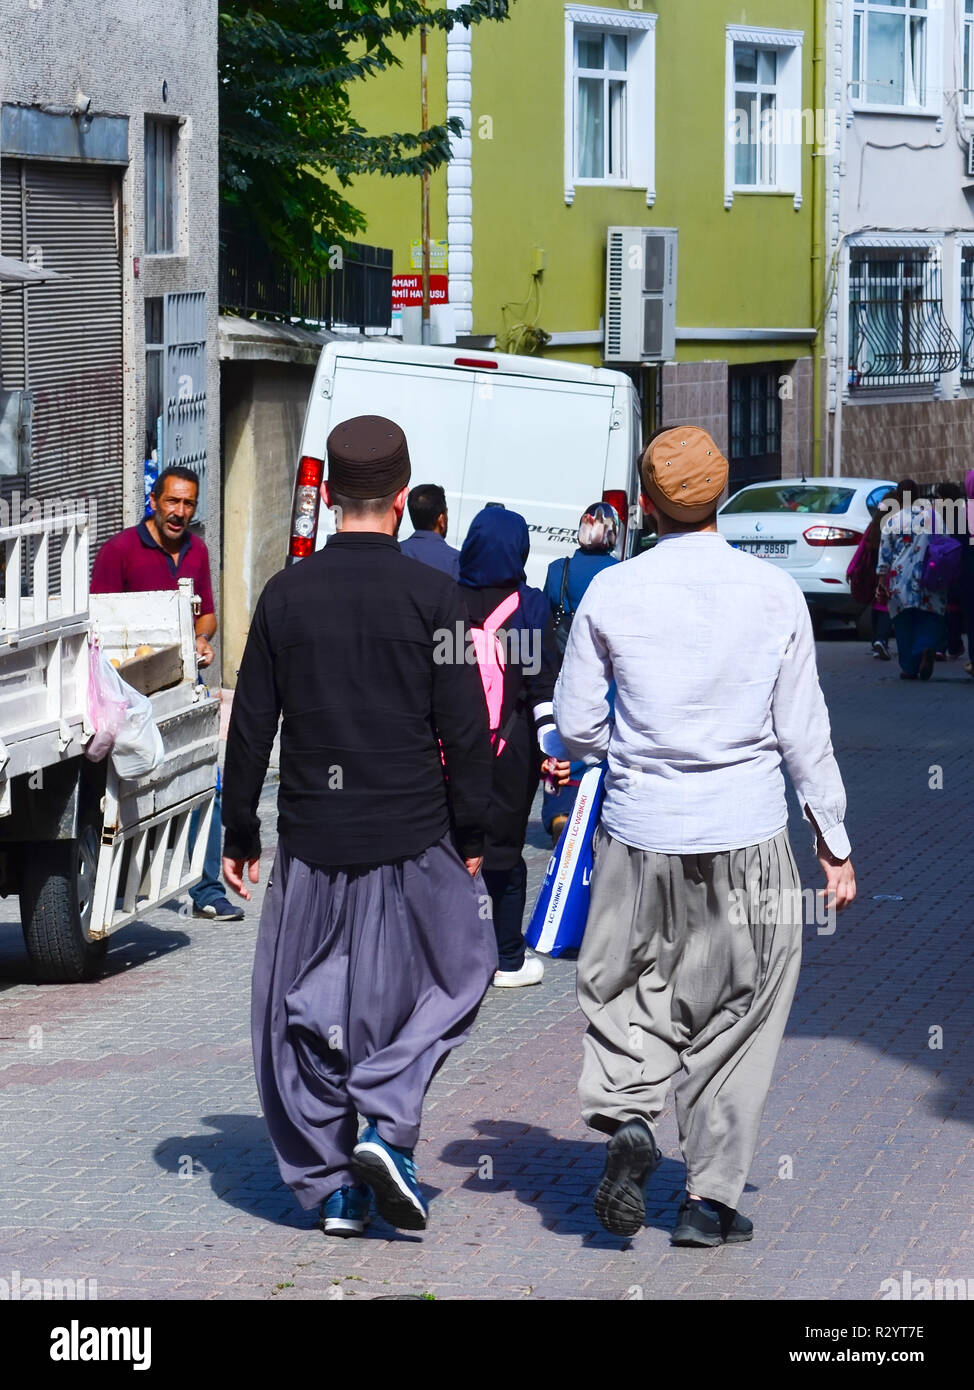 Istanbul, TURKEY, September 20, 2018: Two Muslim men in traditional clothes go shopping on the street of the old city Stock Photo